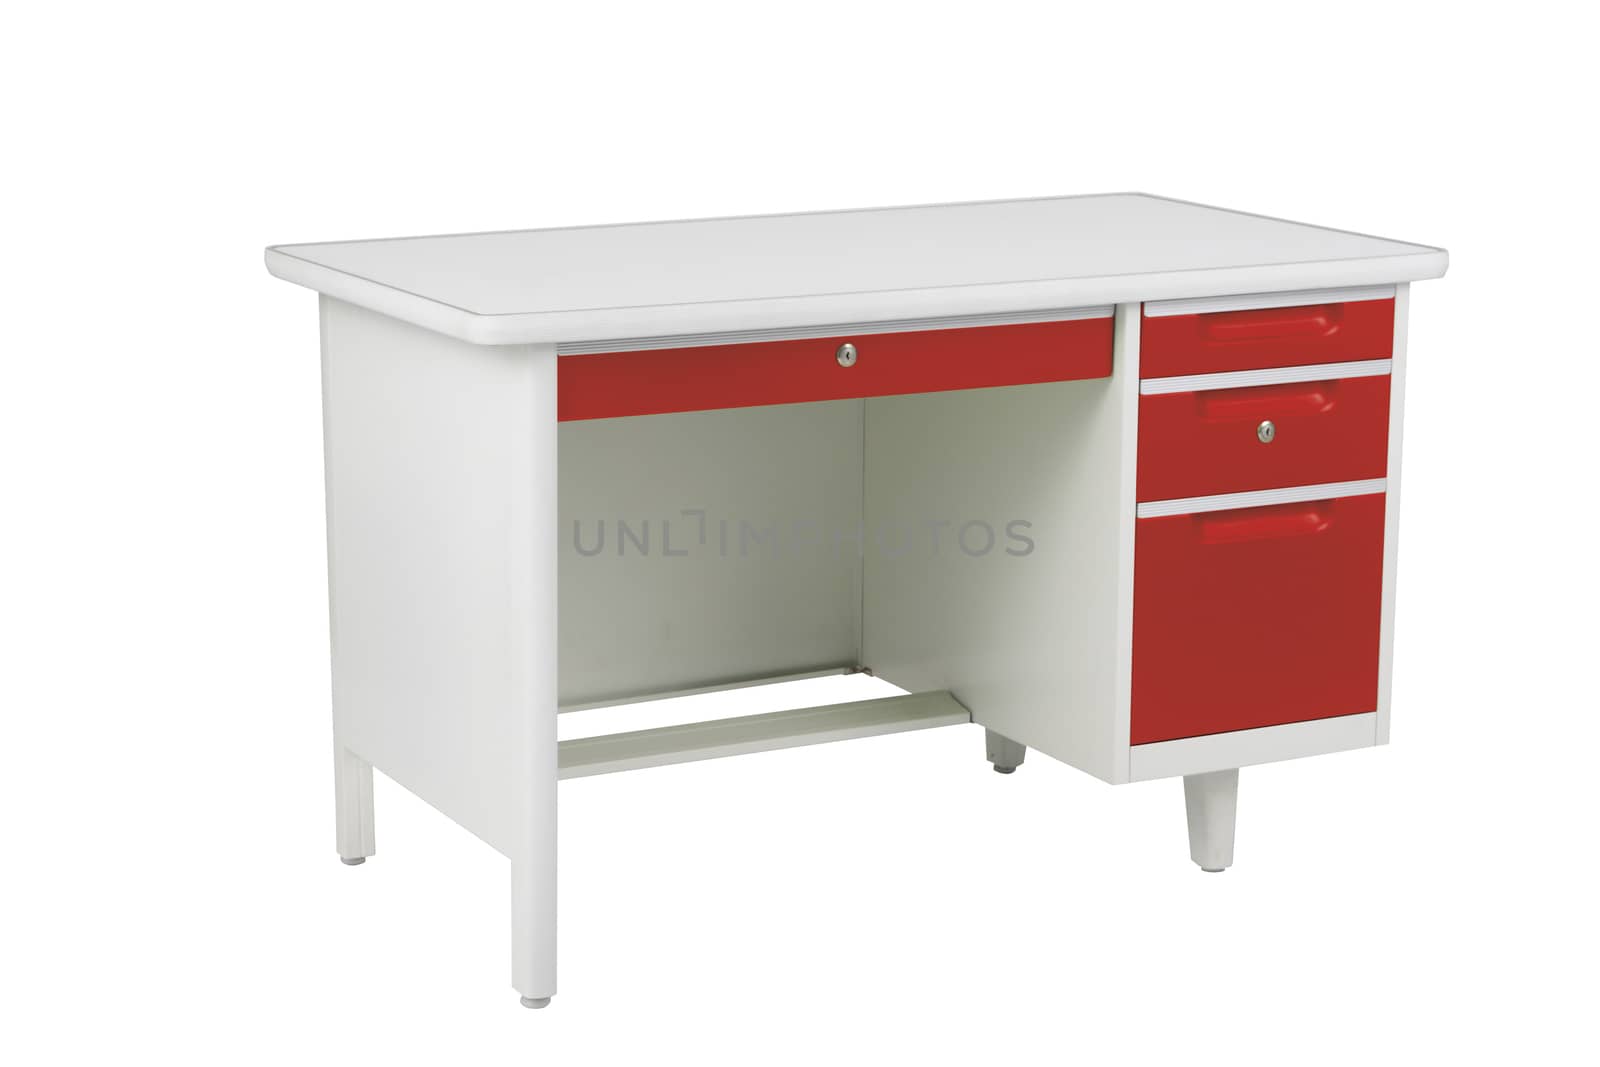 Red and white steel office table with drawers furniture isolated on white background.